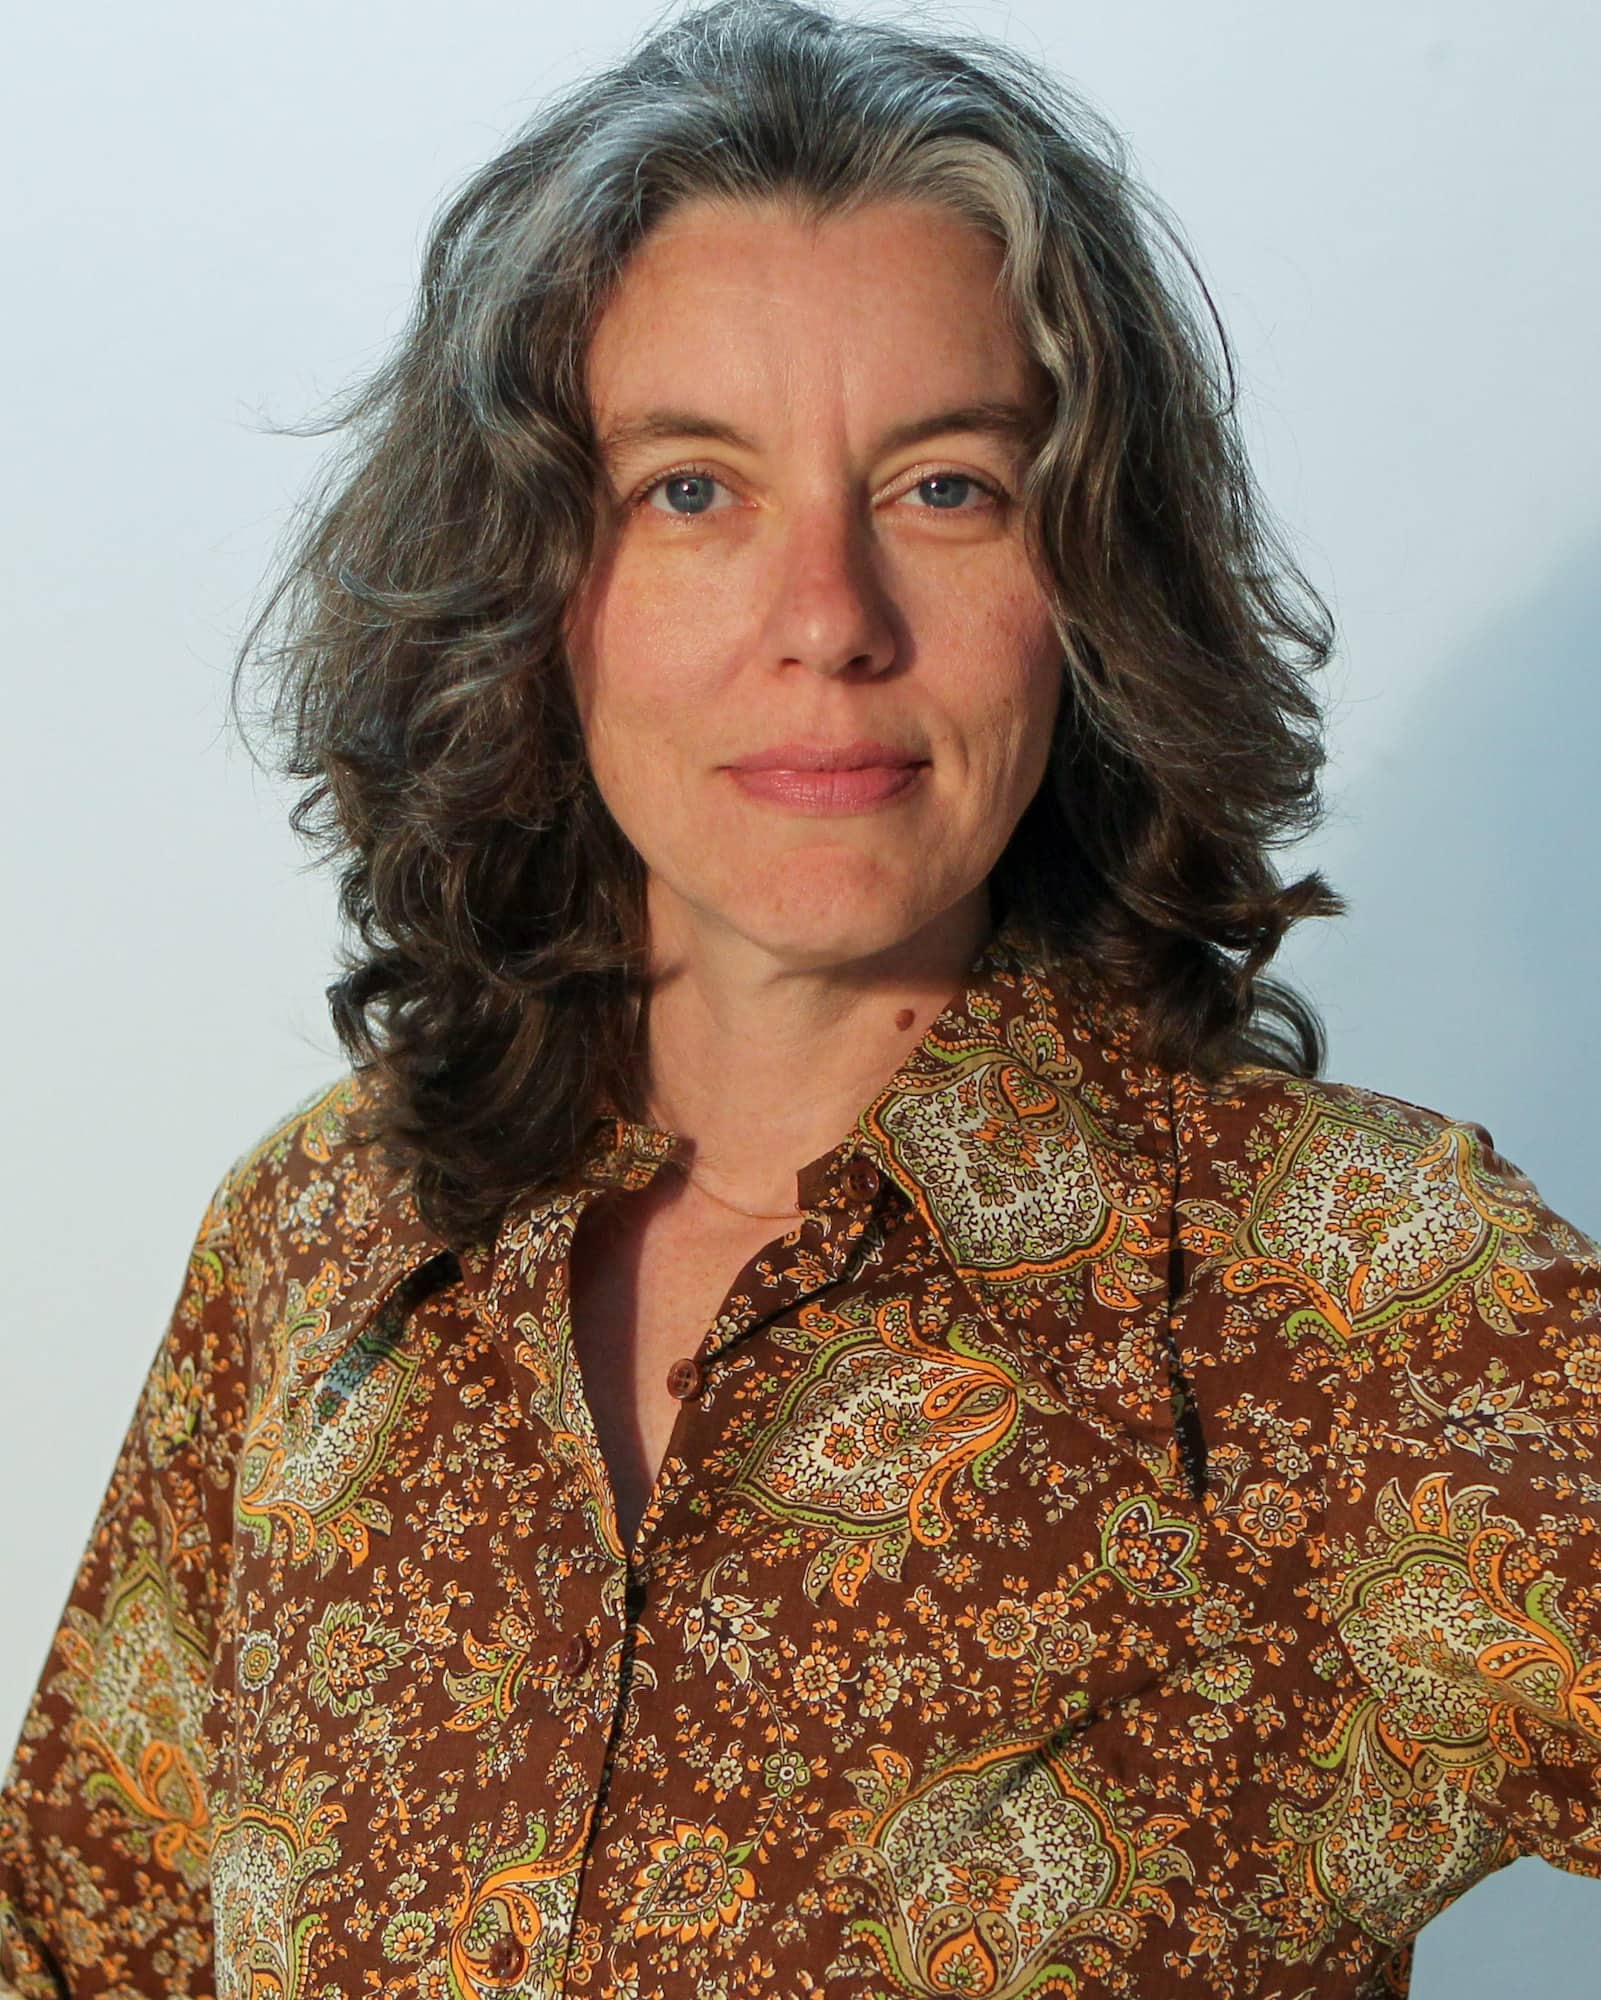 A person with shoulder length grey black wavy hair and a patterned collared shirt looks at the viewer.